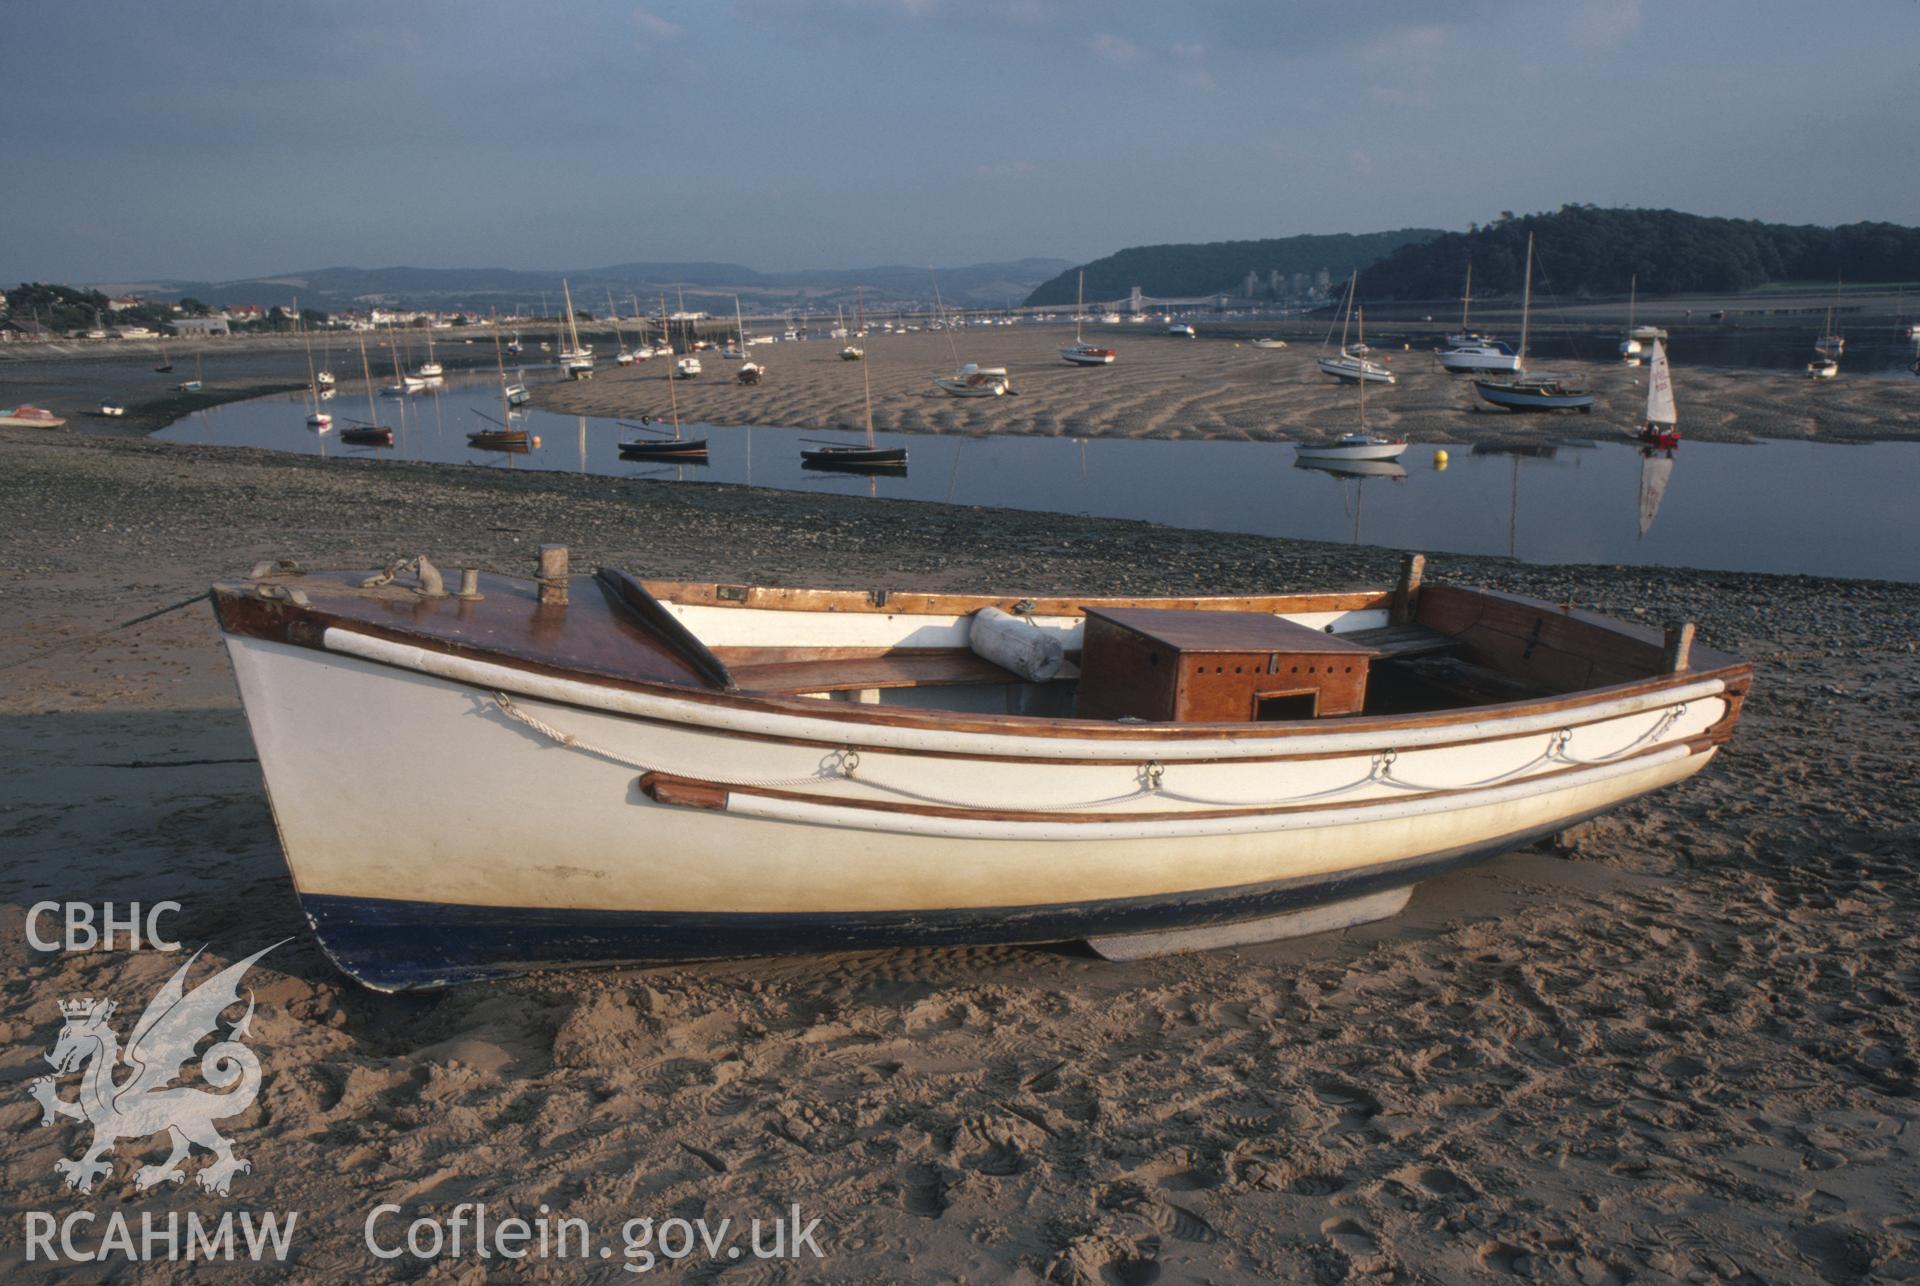 Colour photographic transparency showing view of Conwy beach with boats; collated by the former Central Office of Information.